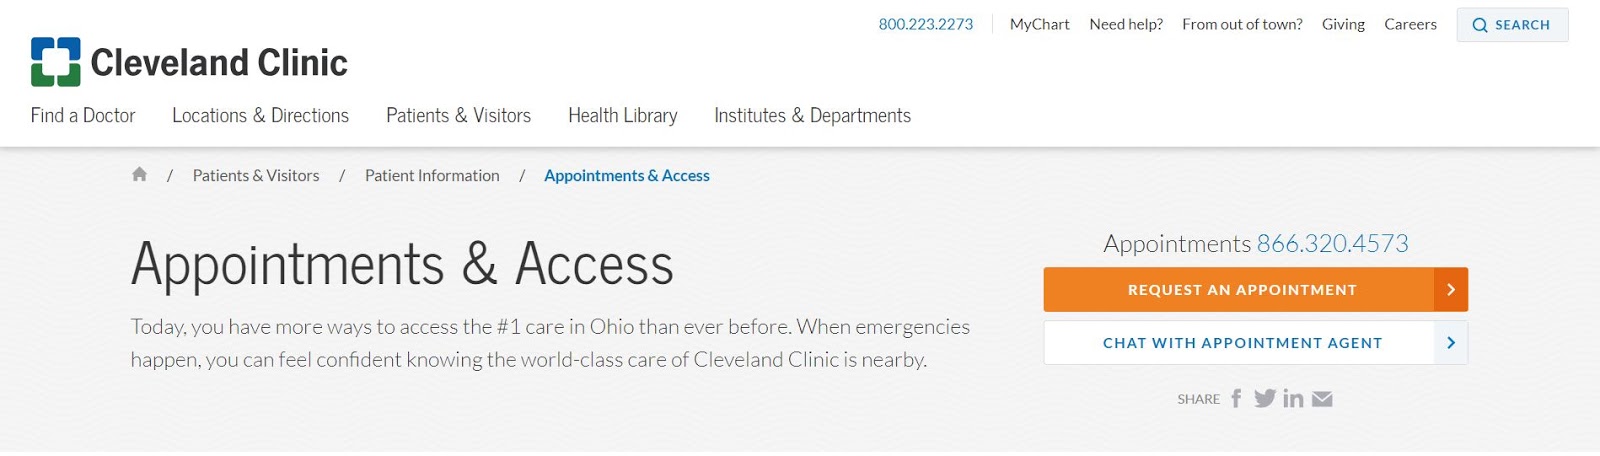 Cleveland Clinic online appointment request